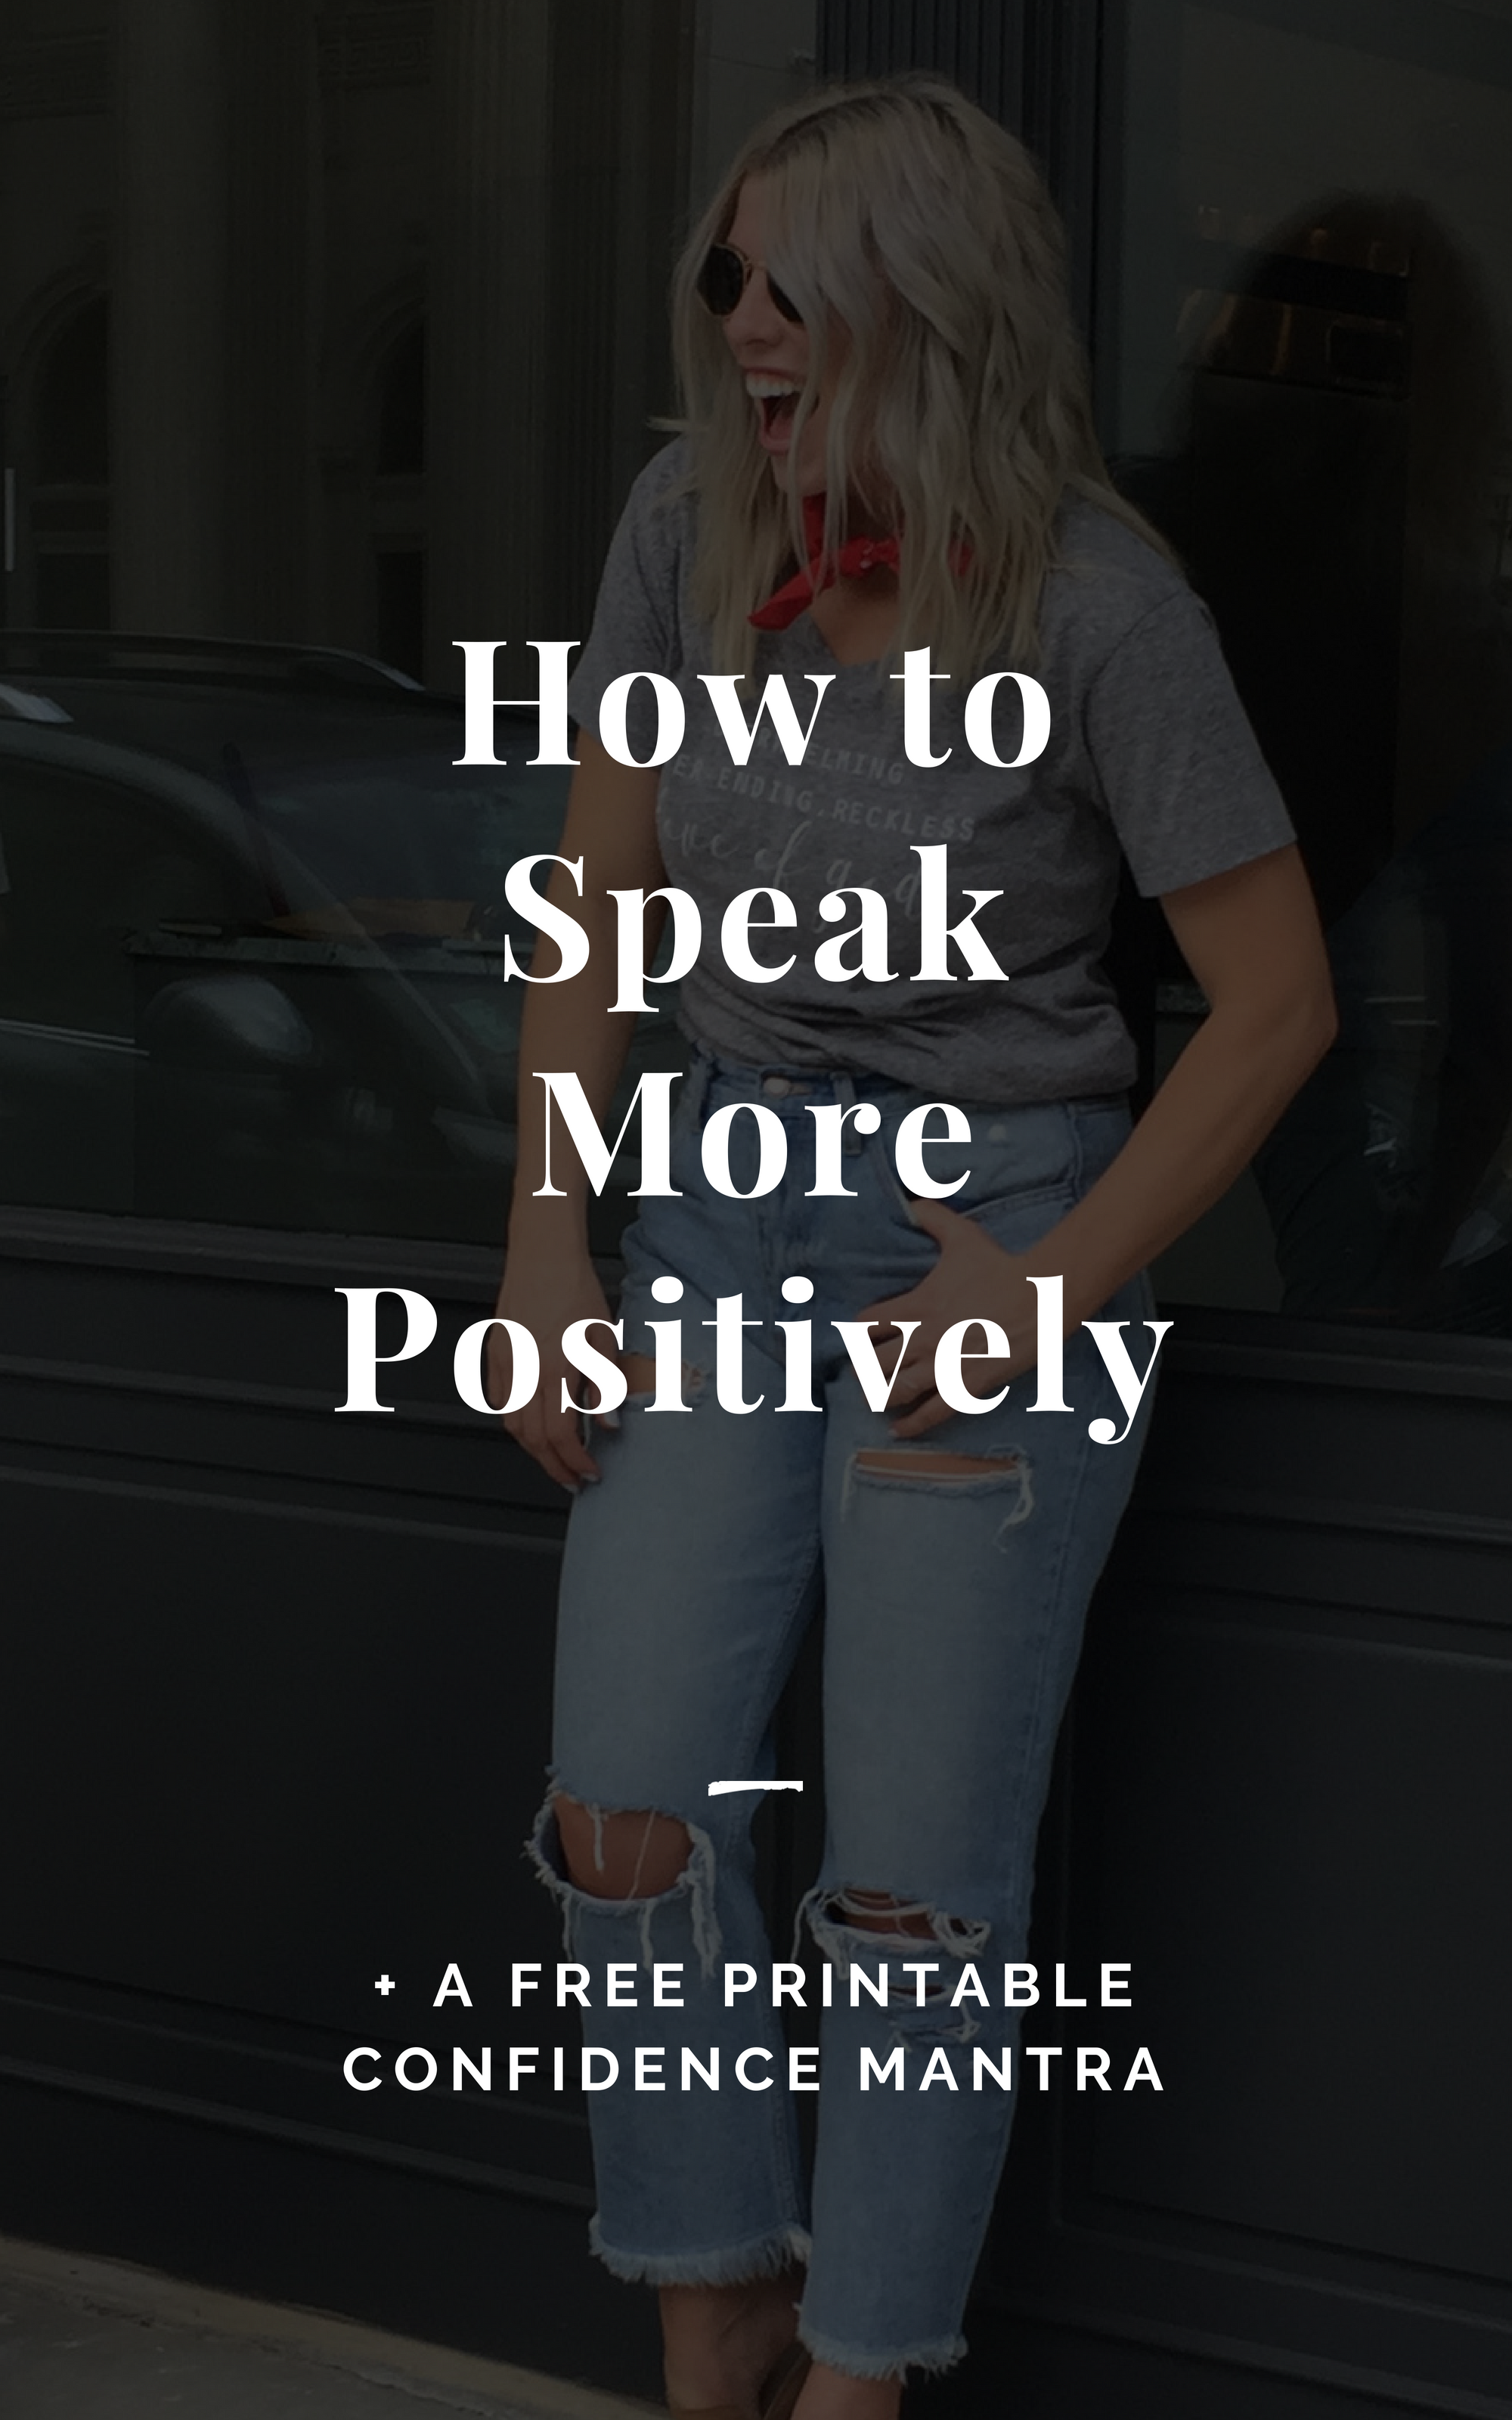 How to Speak More Positively